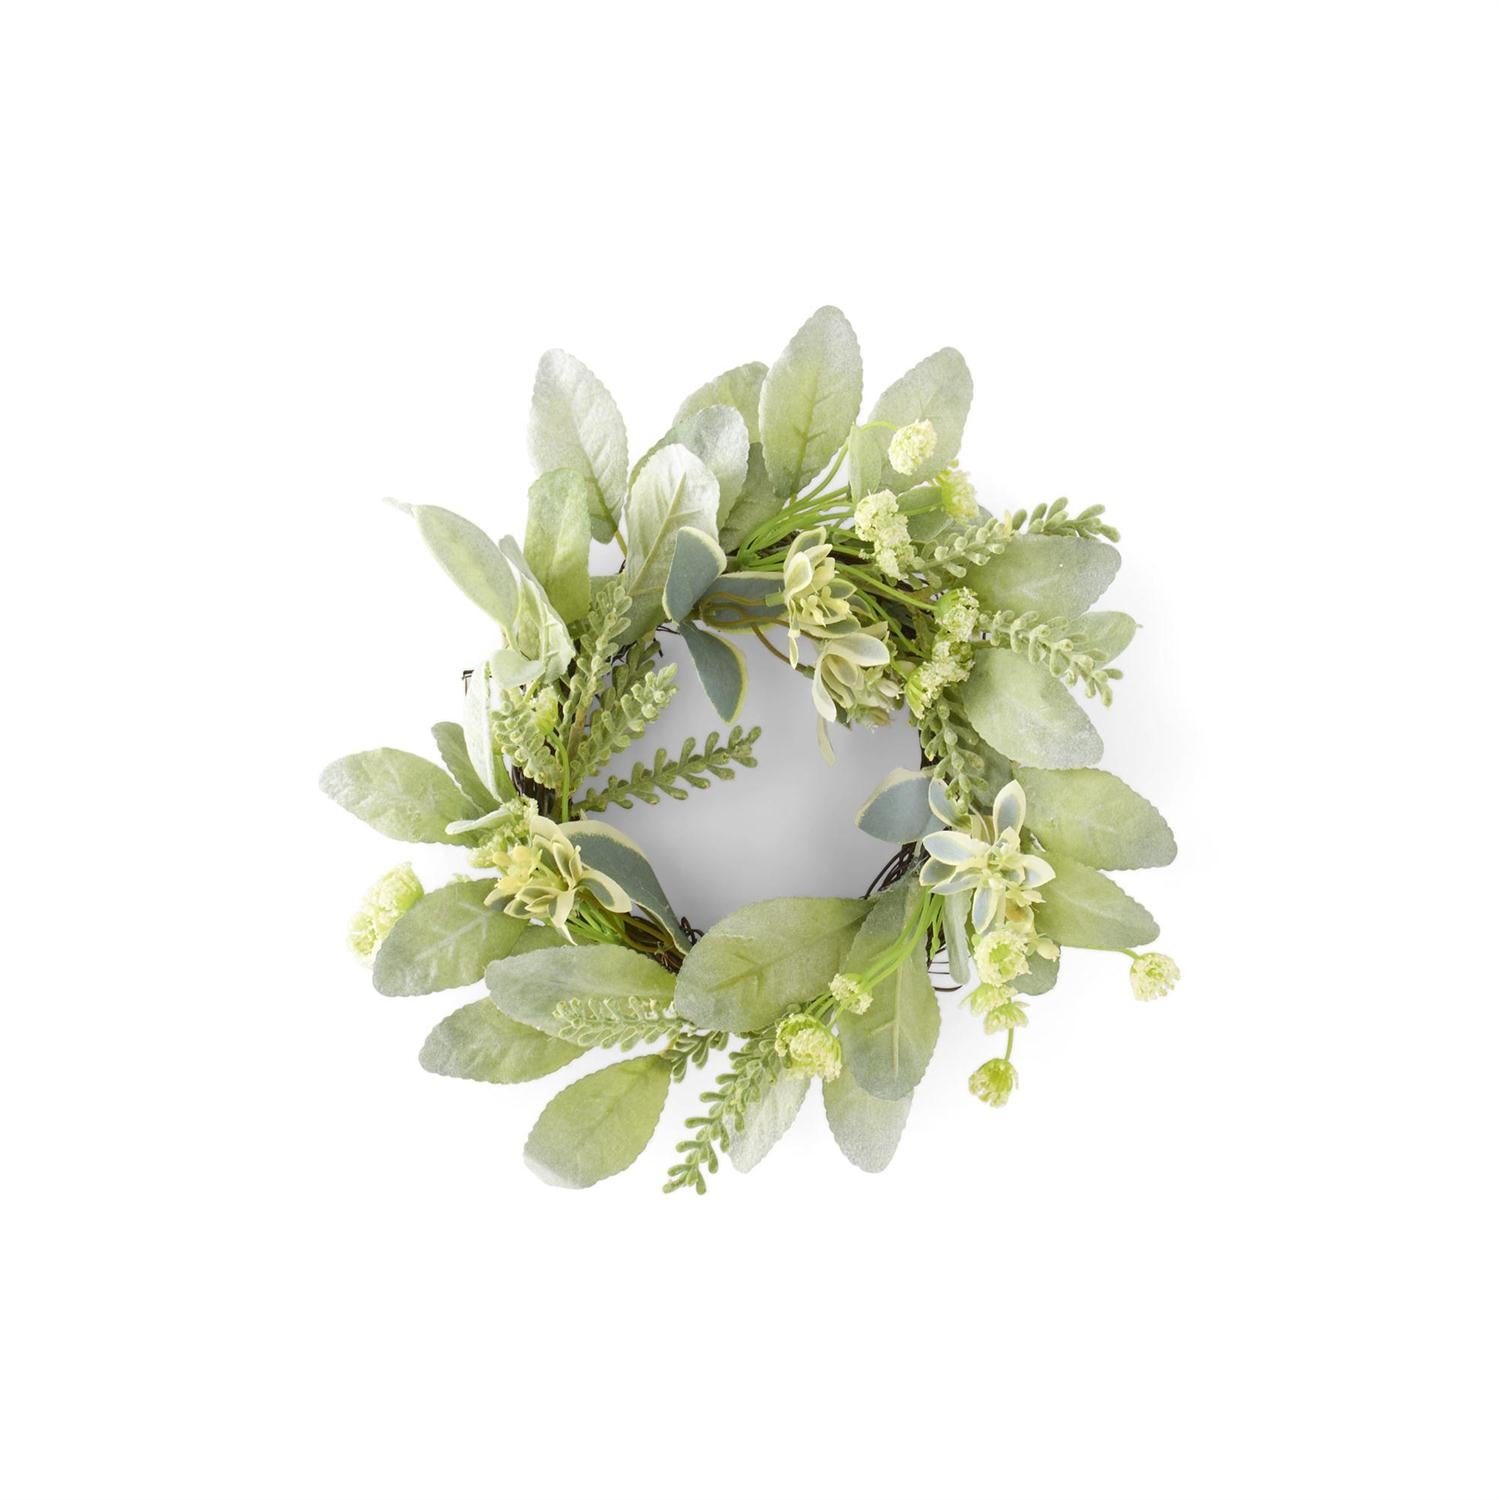 Mixed Foliage with Variegated Milkweed and Cream Flowers  Mini Wreath or Candle Ring, 11 in.